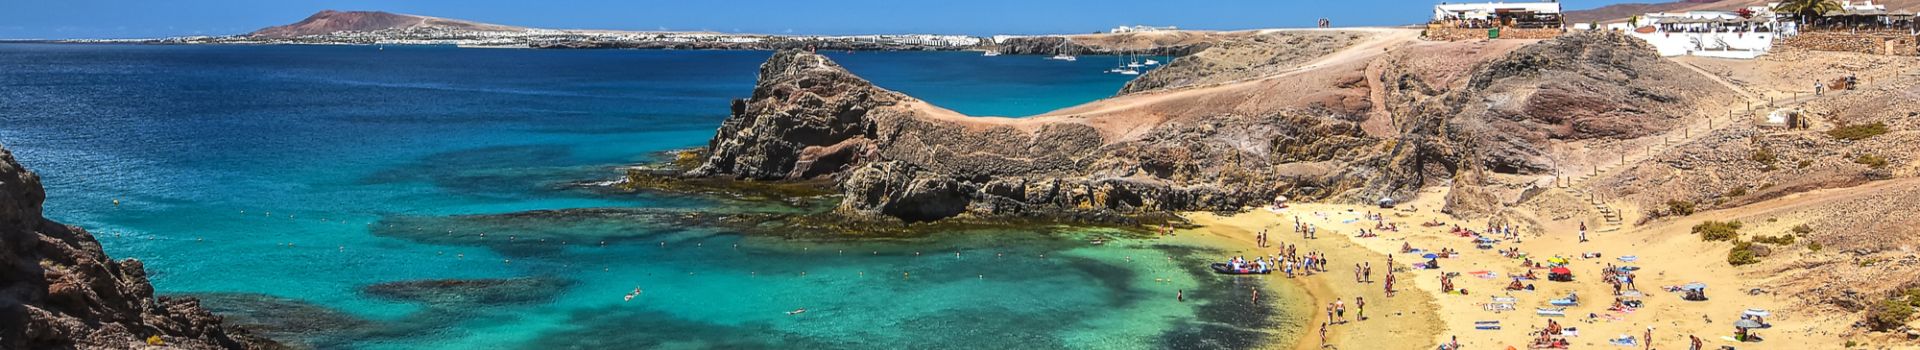 All inclusive family holidays to Lanzarote with Cassidy Travel